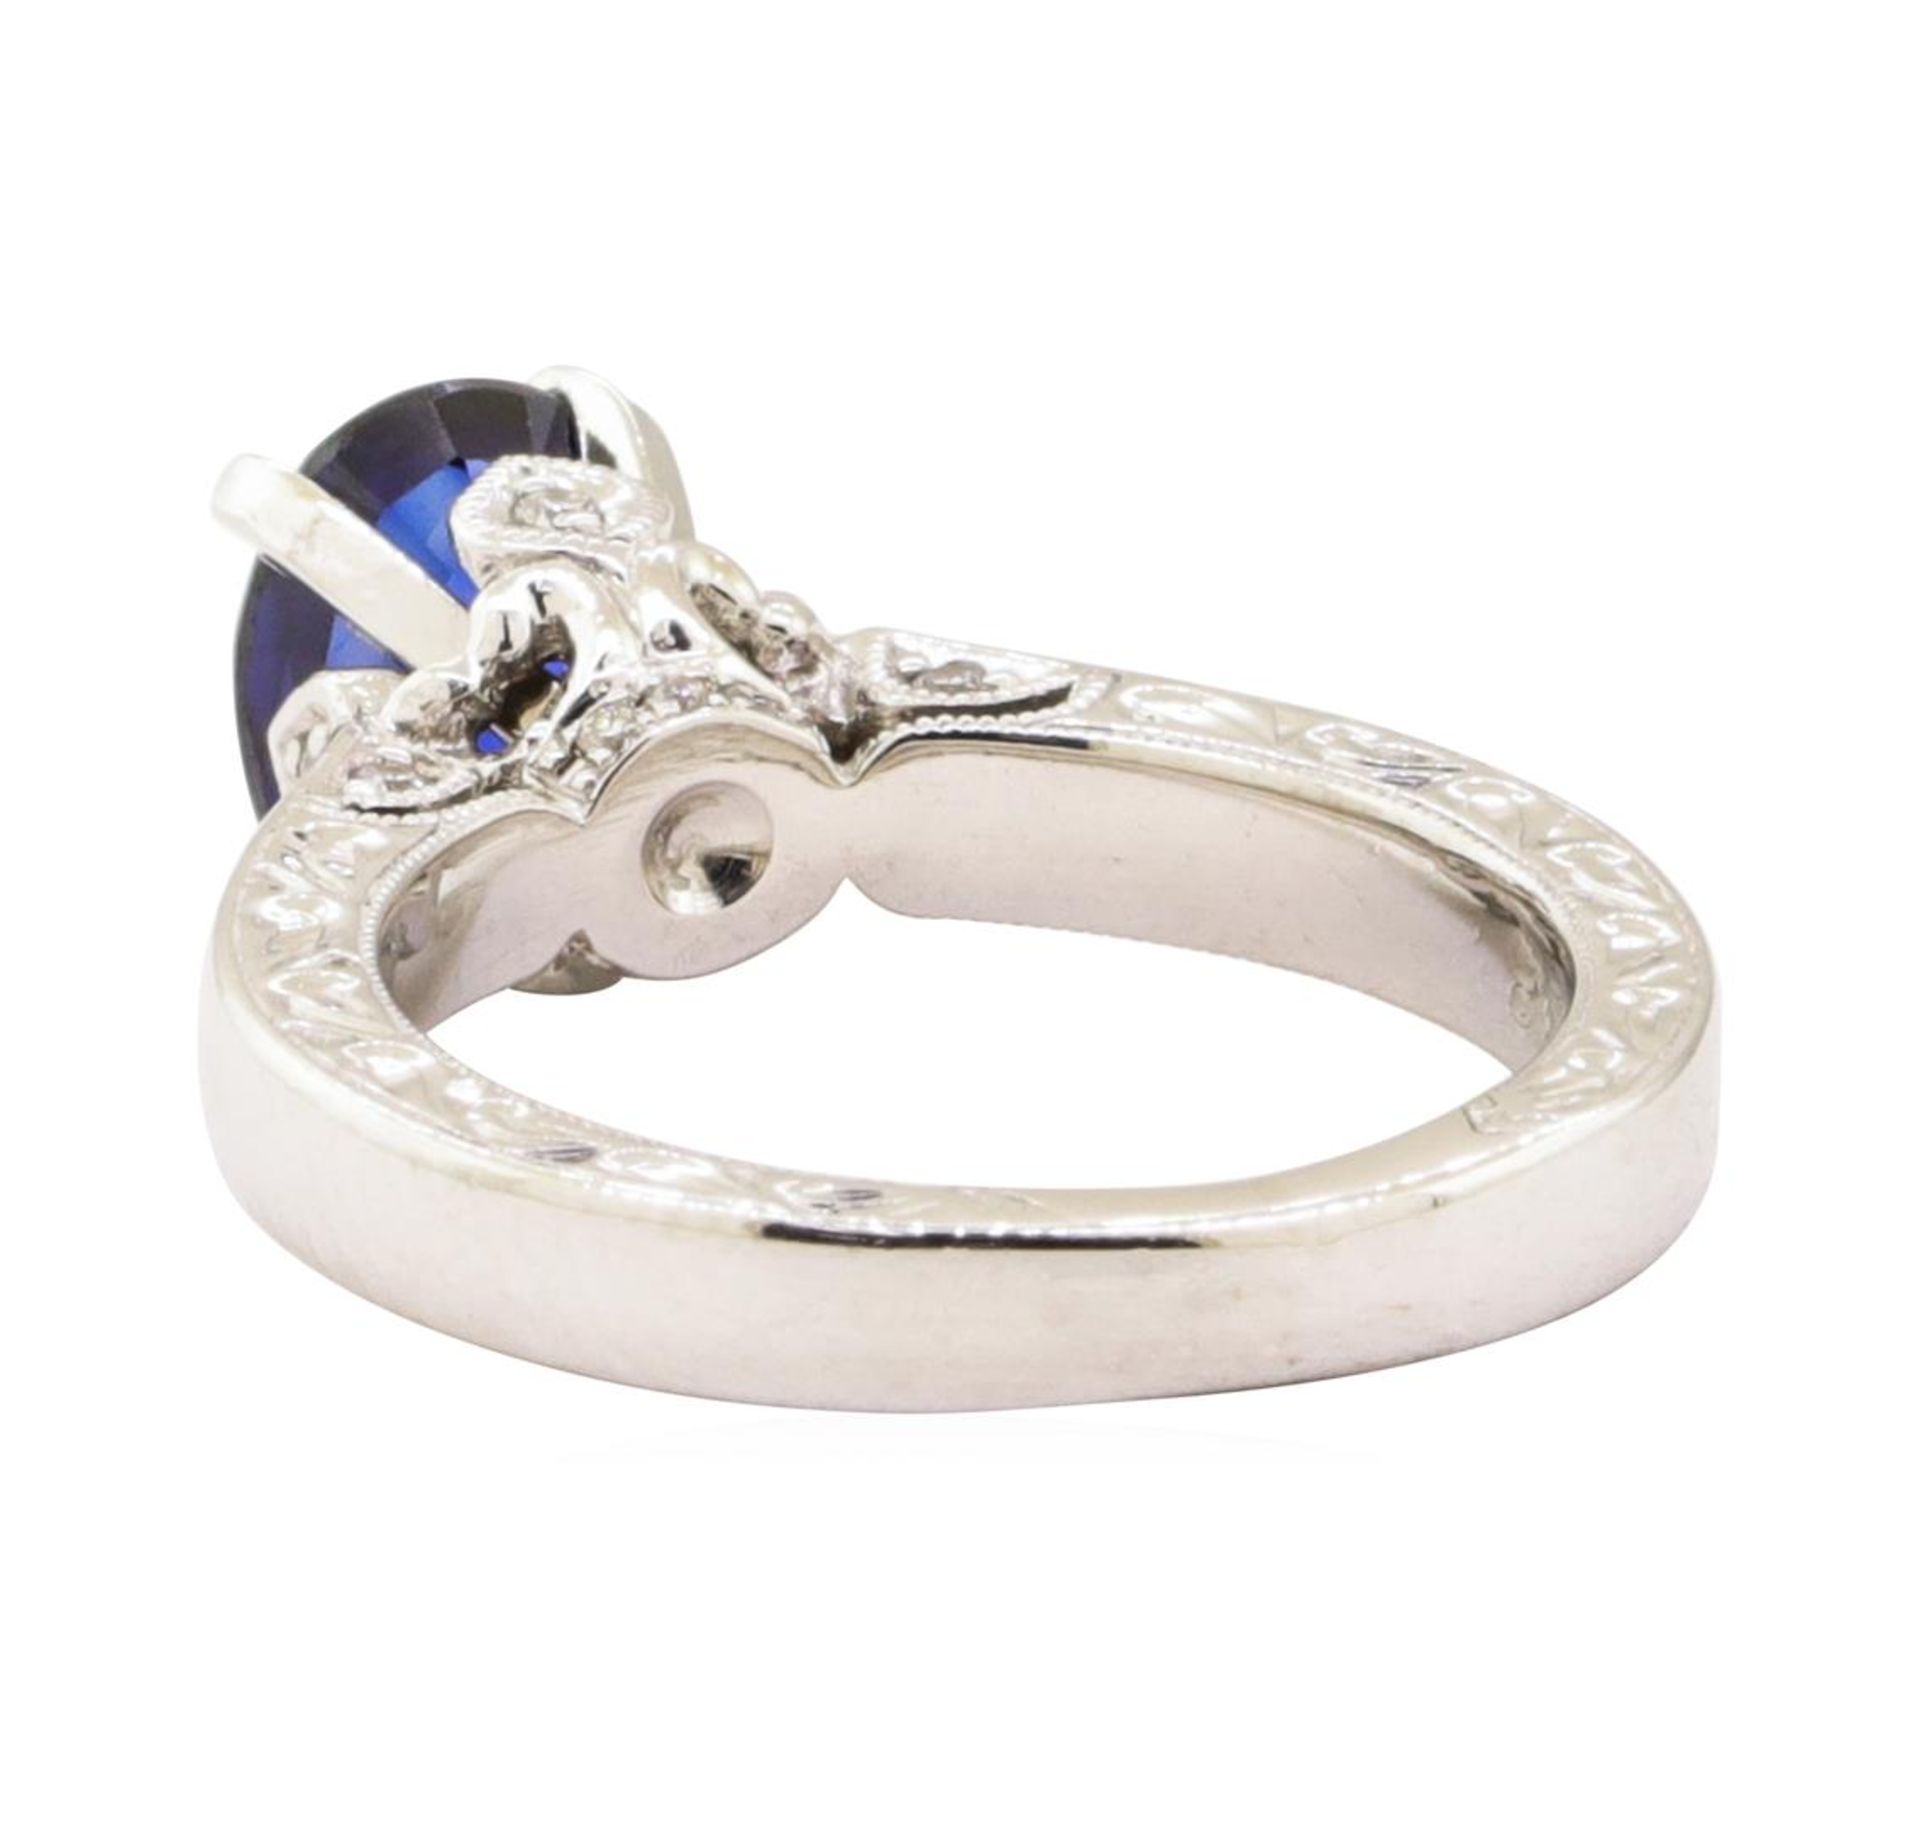 1.66 ctw Blue Sapphire and Diamond Ring - 14KT White Gold - Image 3 of 4